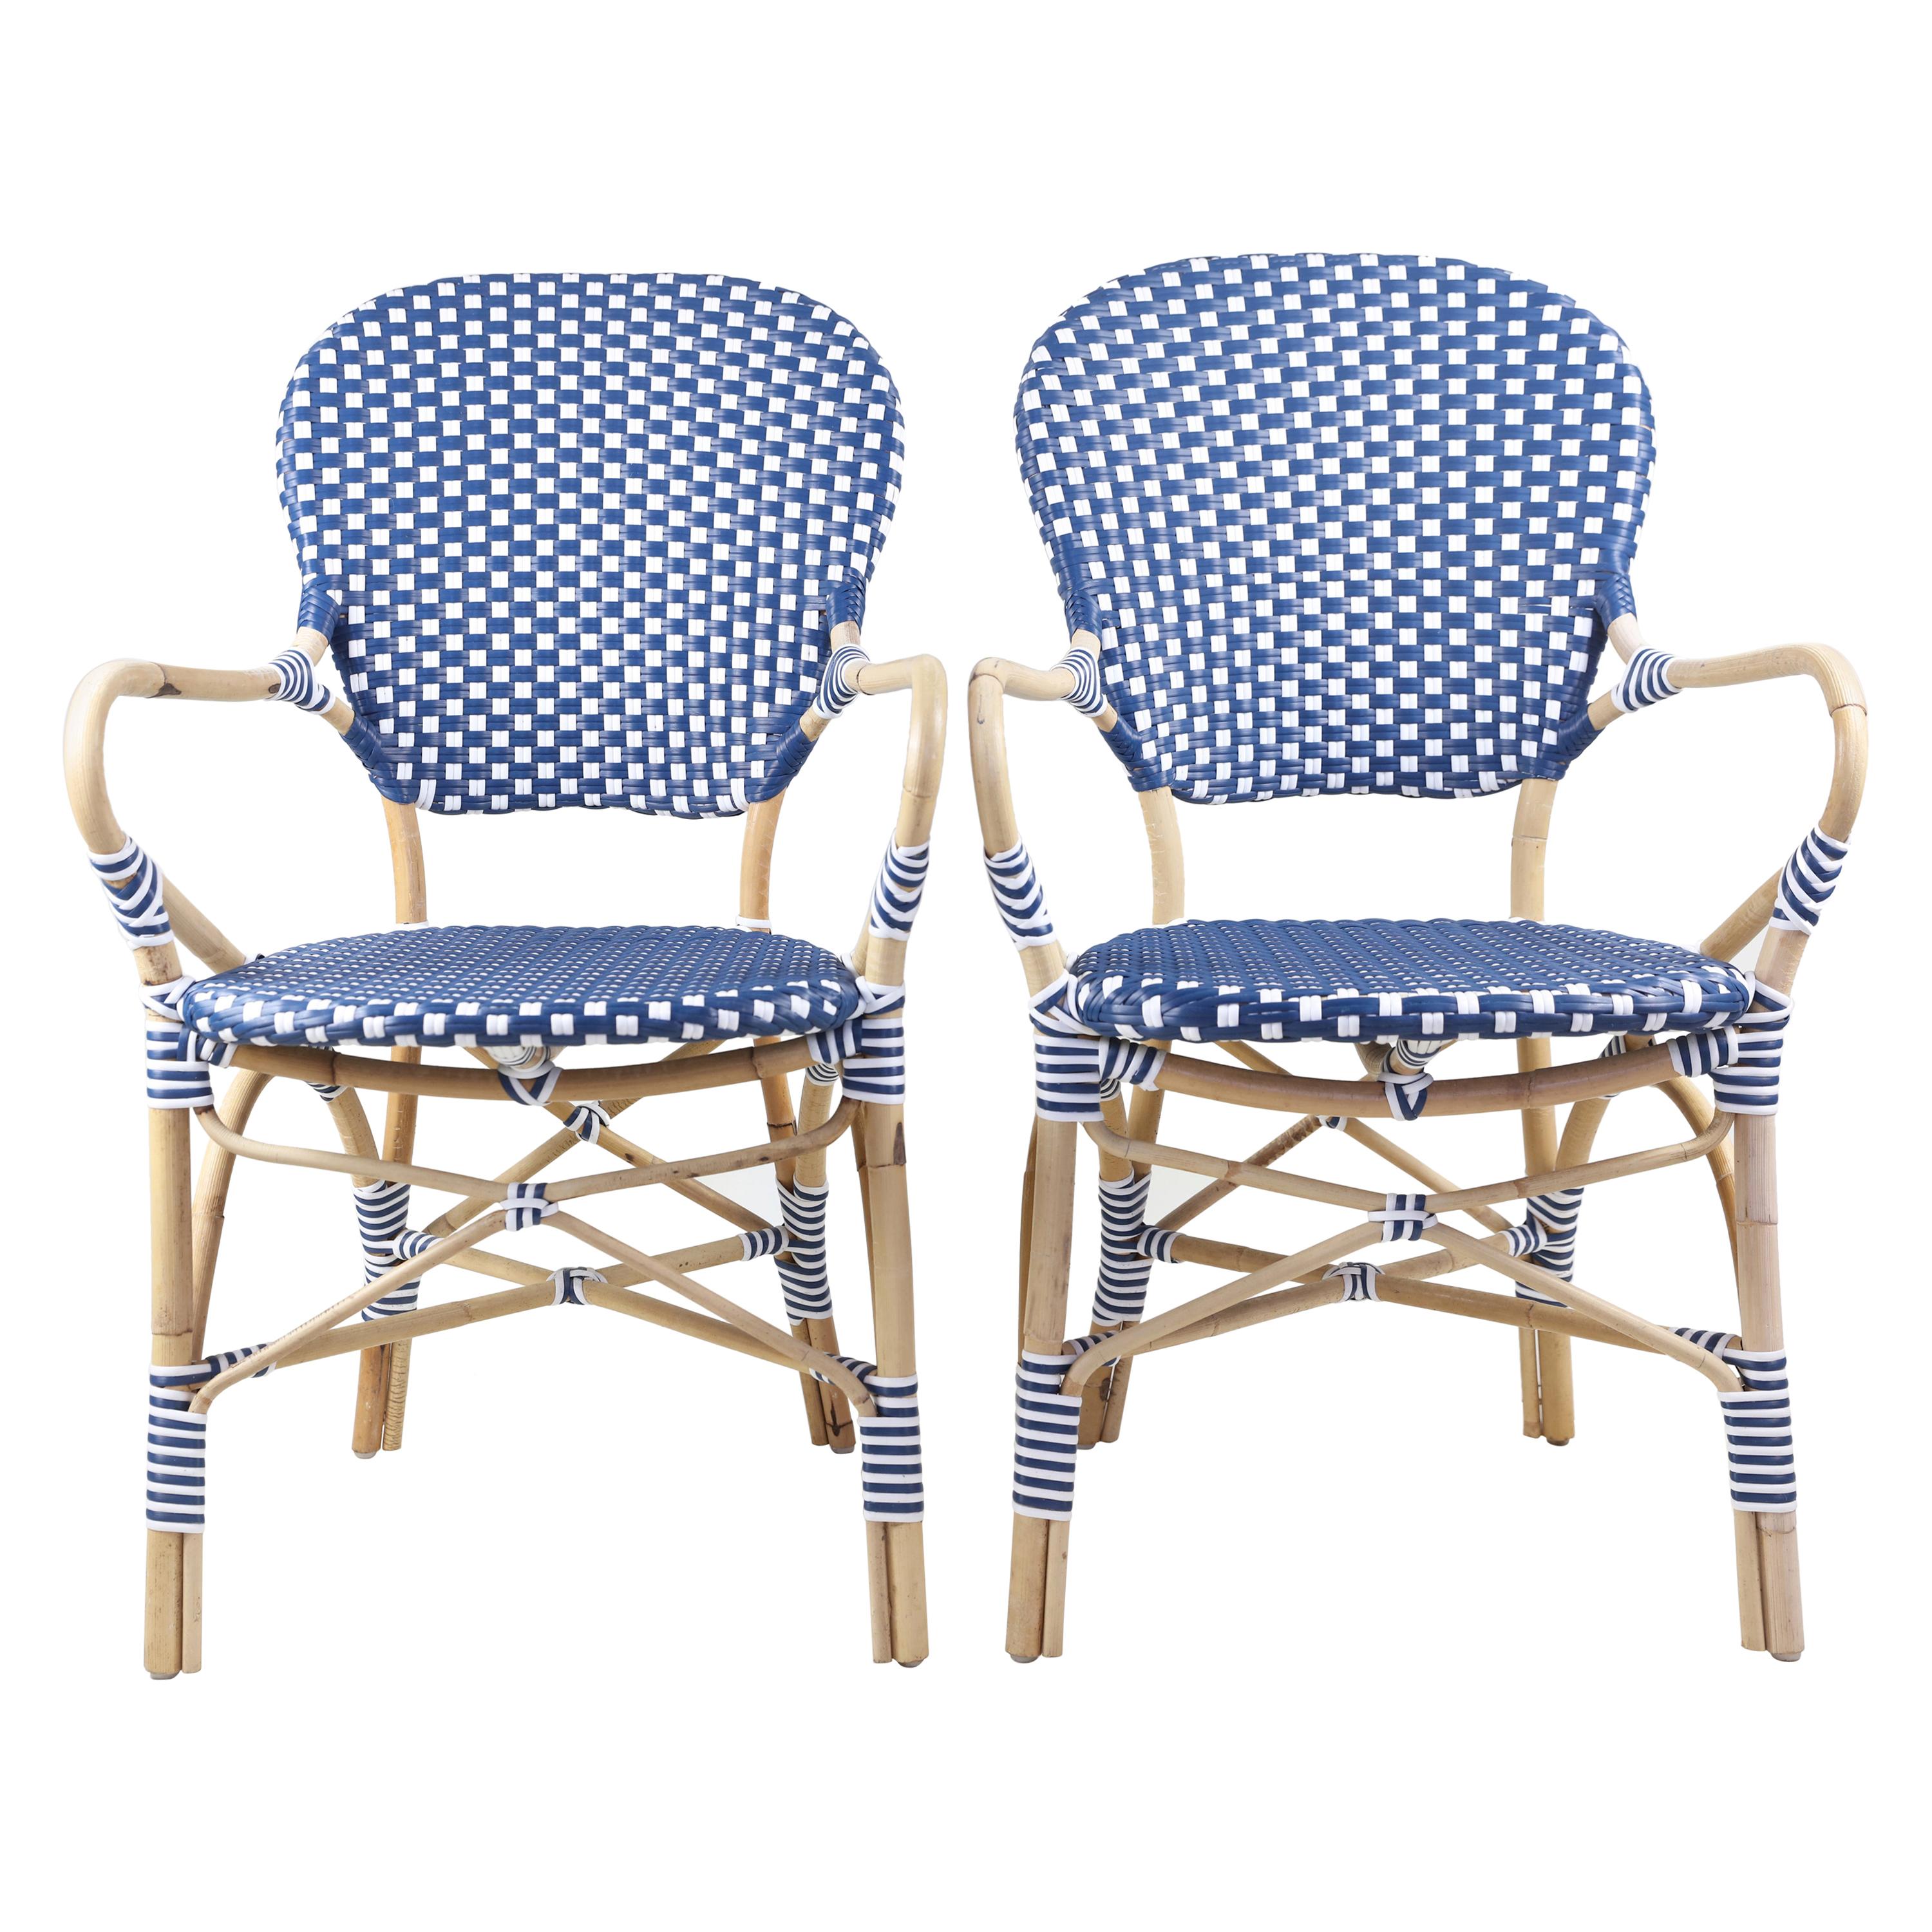 Pair of Blue and White Serena & Lily Woven Chairs